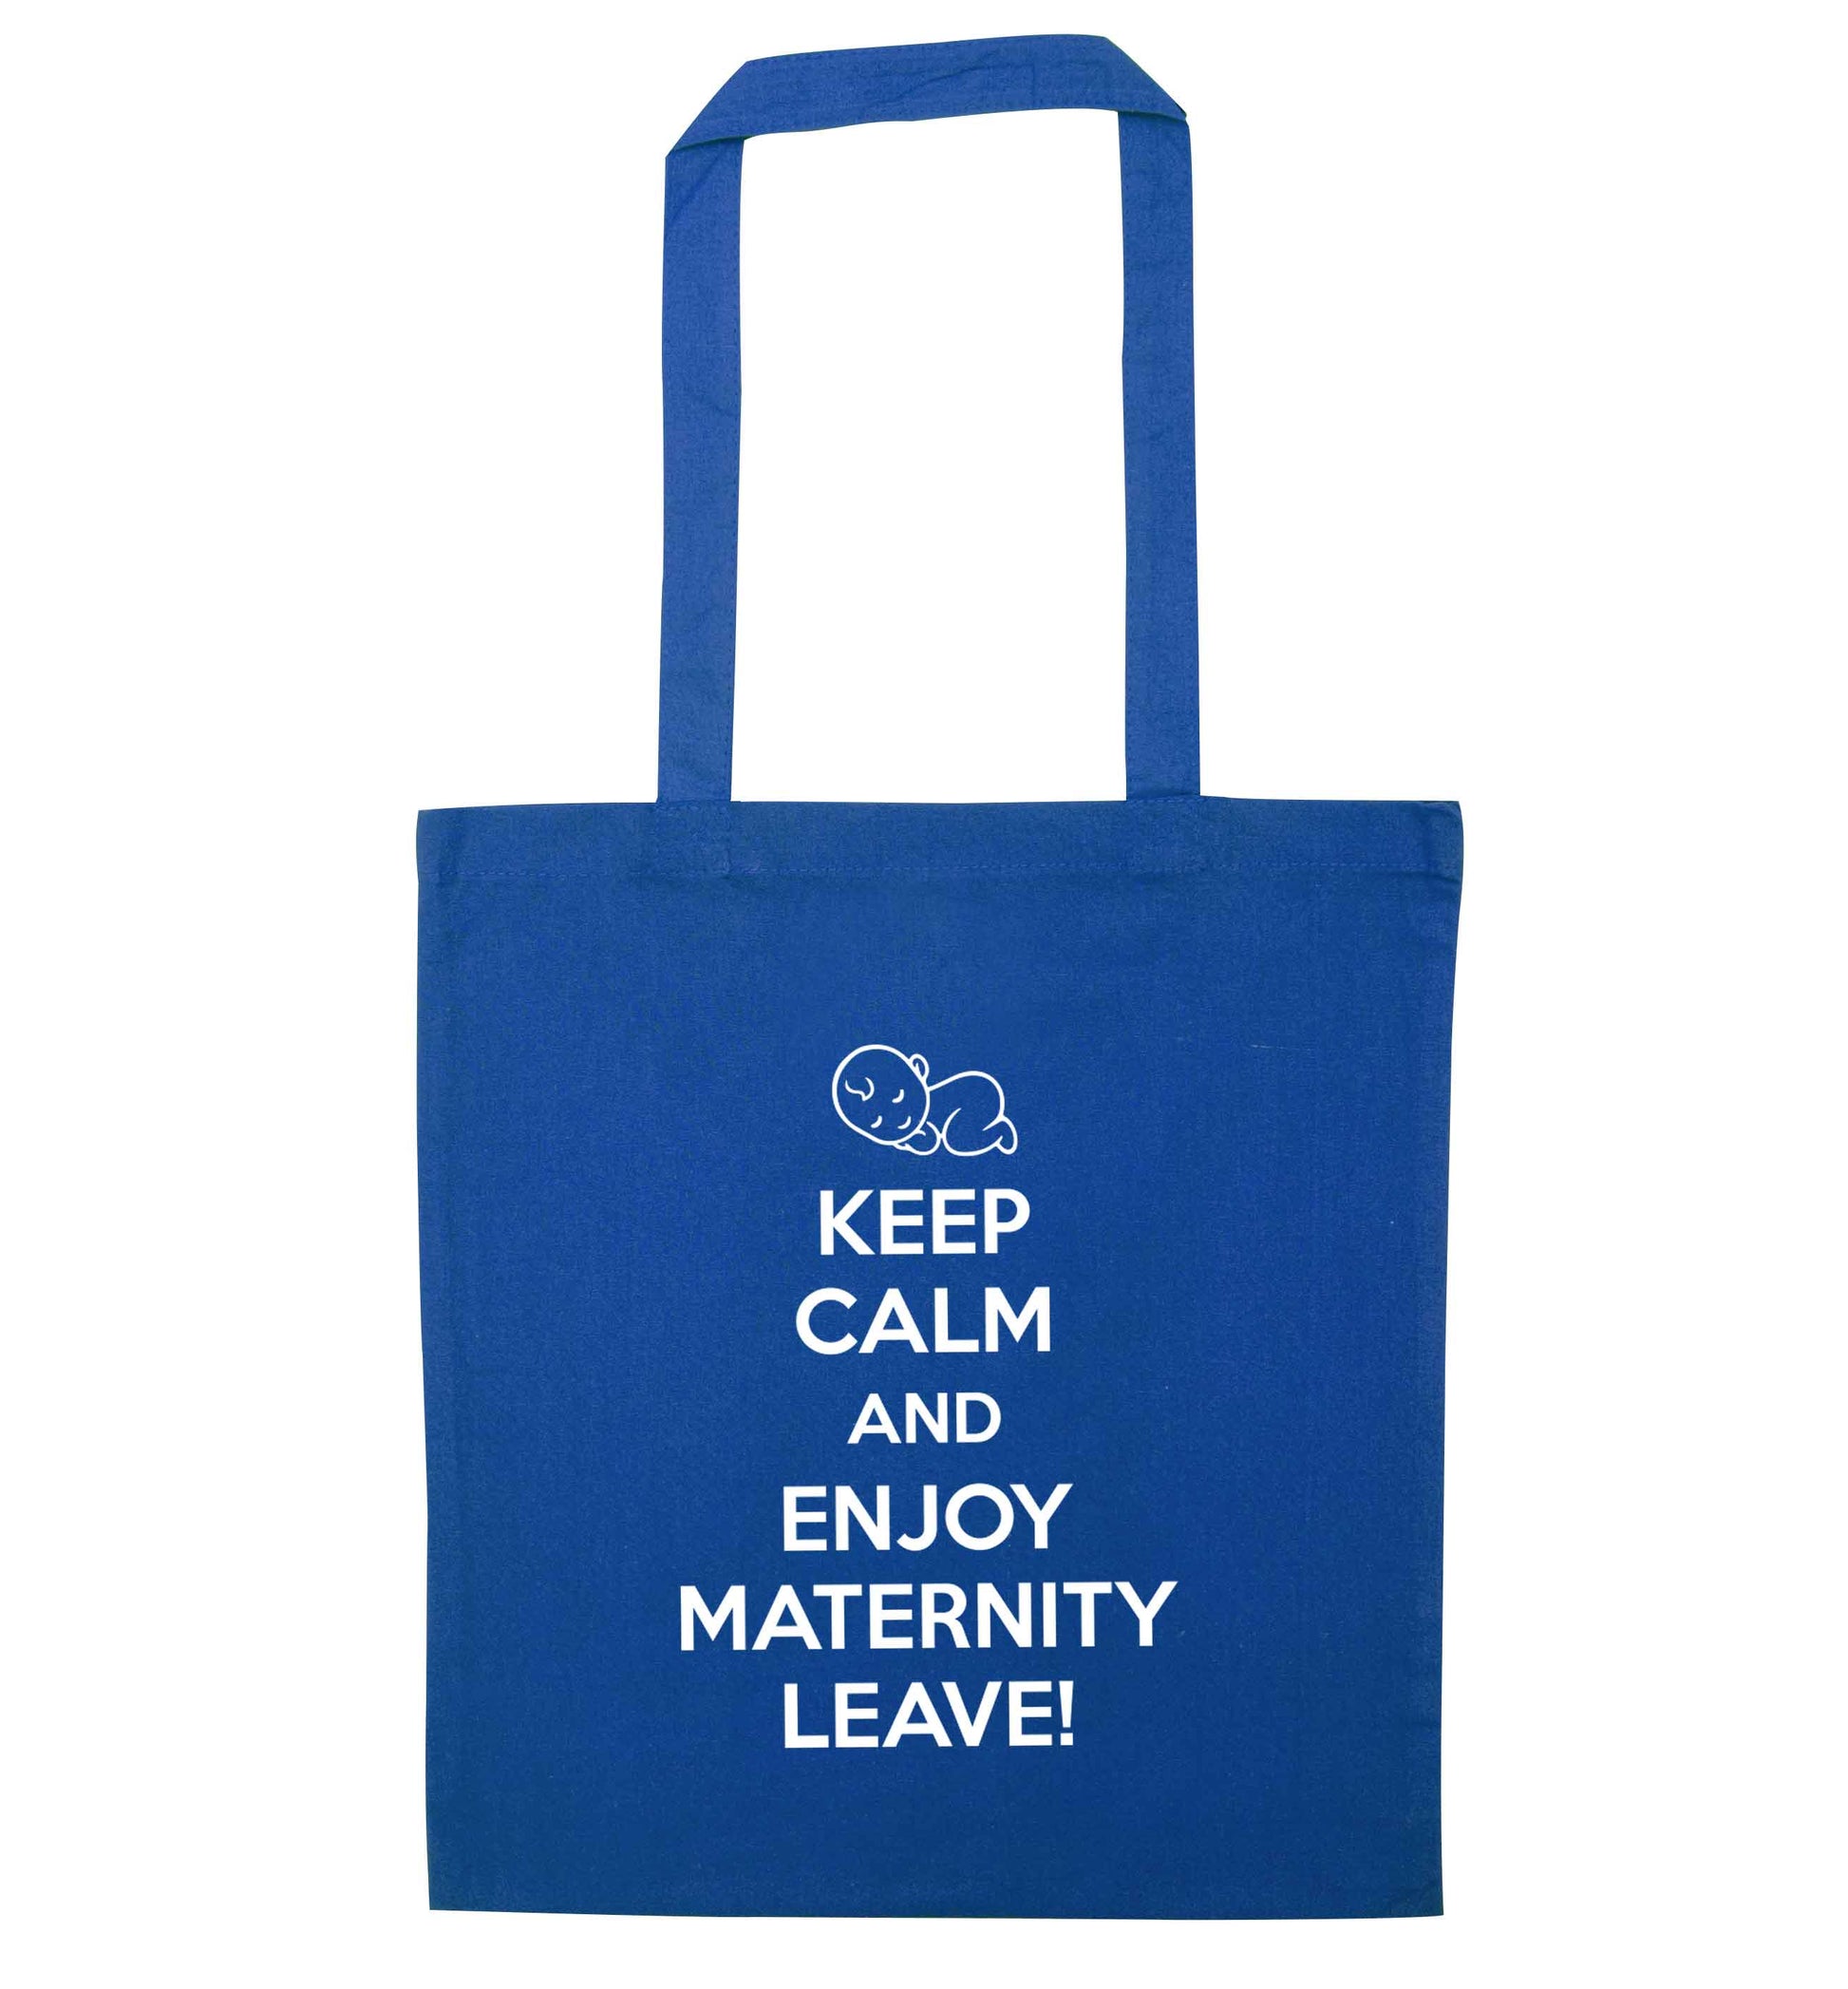 Keep calm and enjoy maternity leave blue tote bag